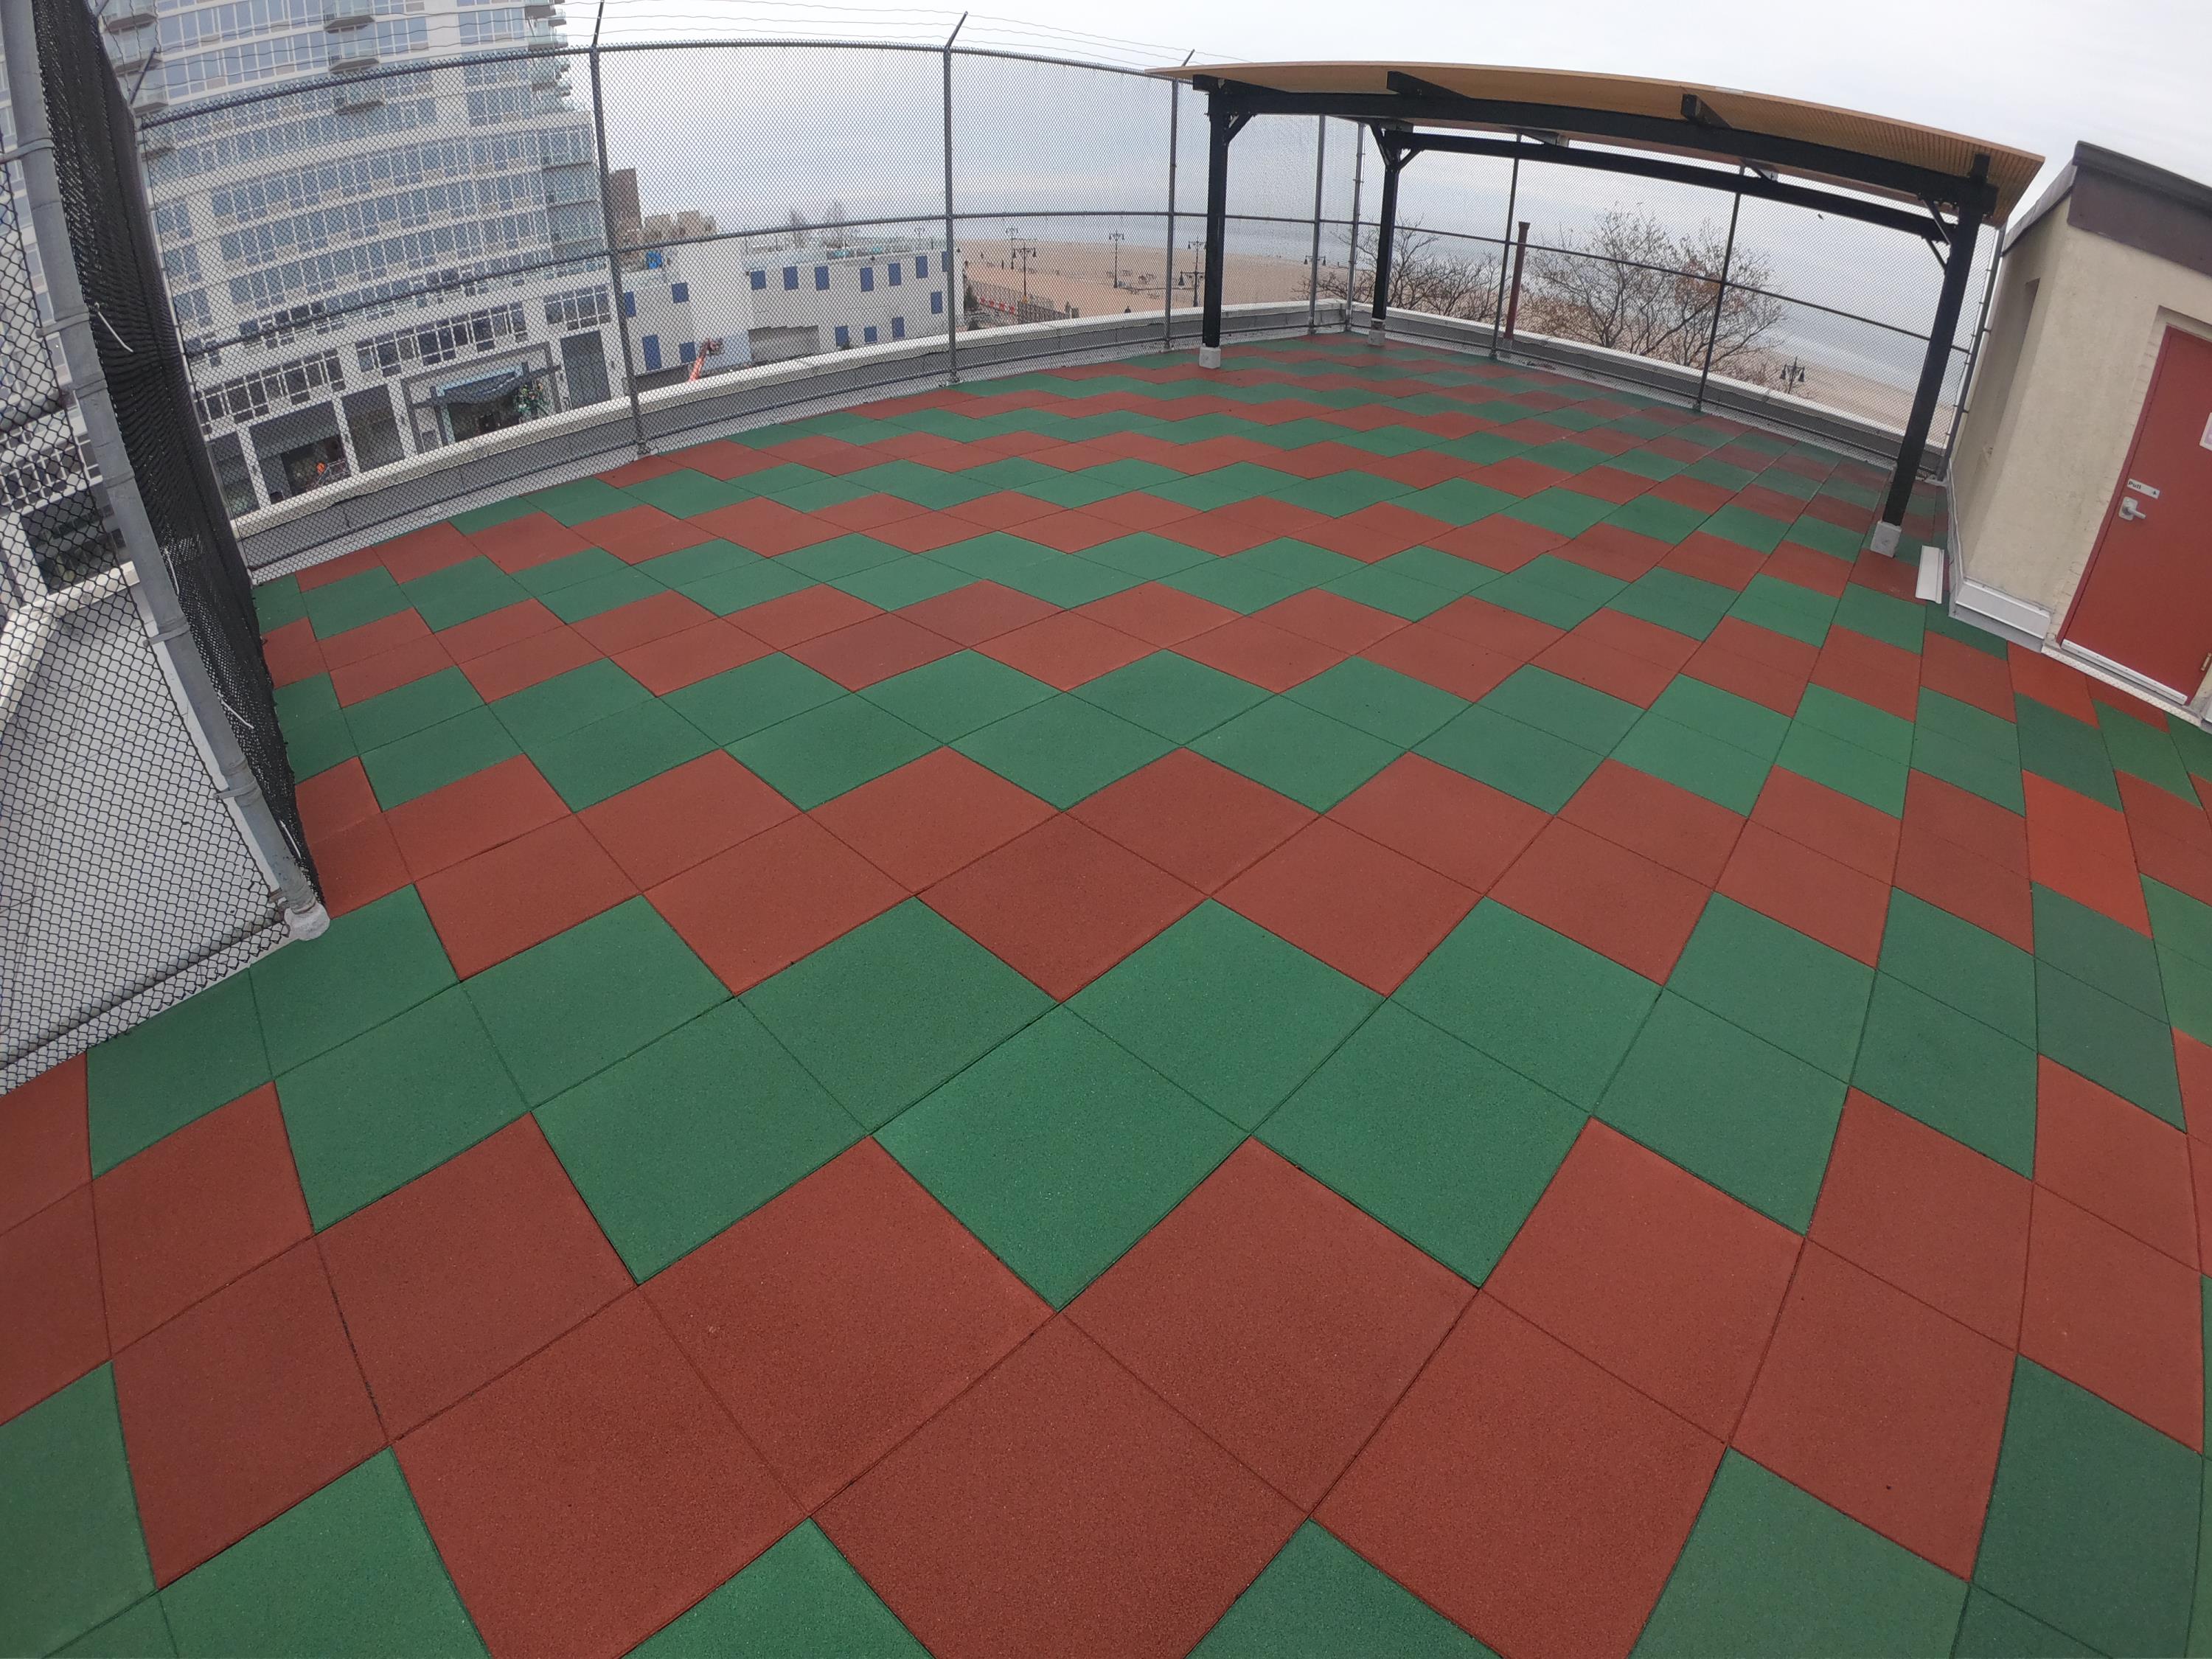 UNITY SURFACING at PAL School Rooftop Playground Tiles b